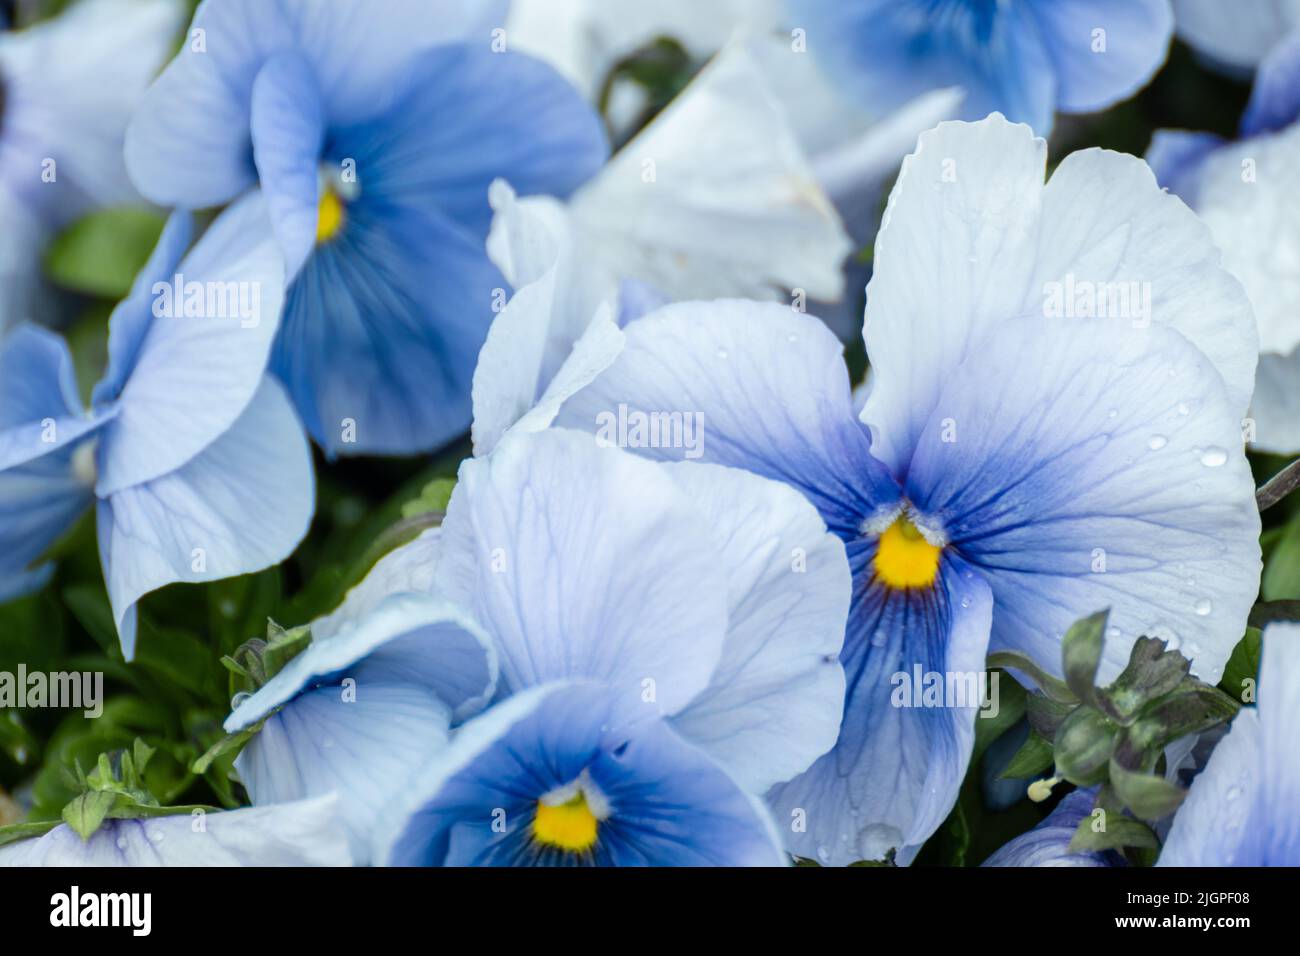 Blue Viola Cornuta pansies flowers with tender petals and yellow center close-up, floral background with blooming heartsease pansy flowers Stock Photo